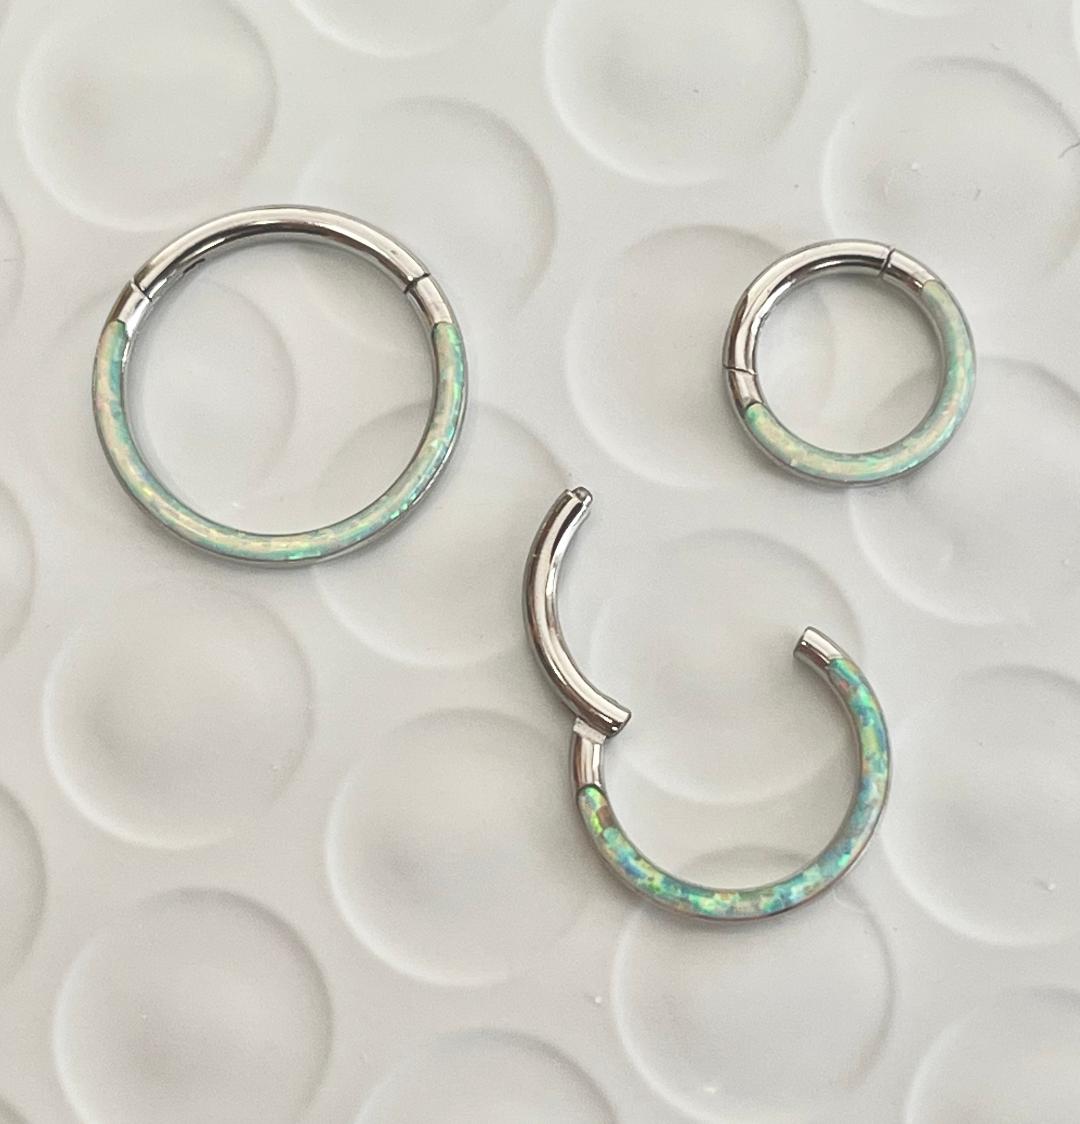 1pc Opal Front Edge Hinged Segment Ring Septum Clicker Daith Hoop 316L Surgical Steel